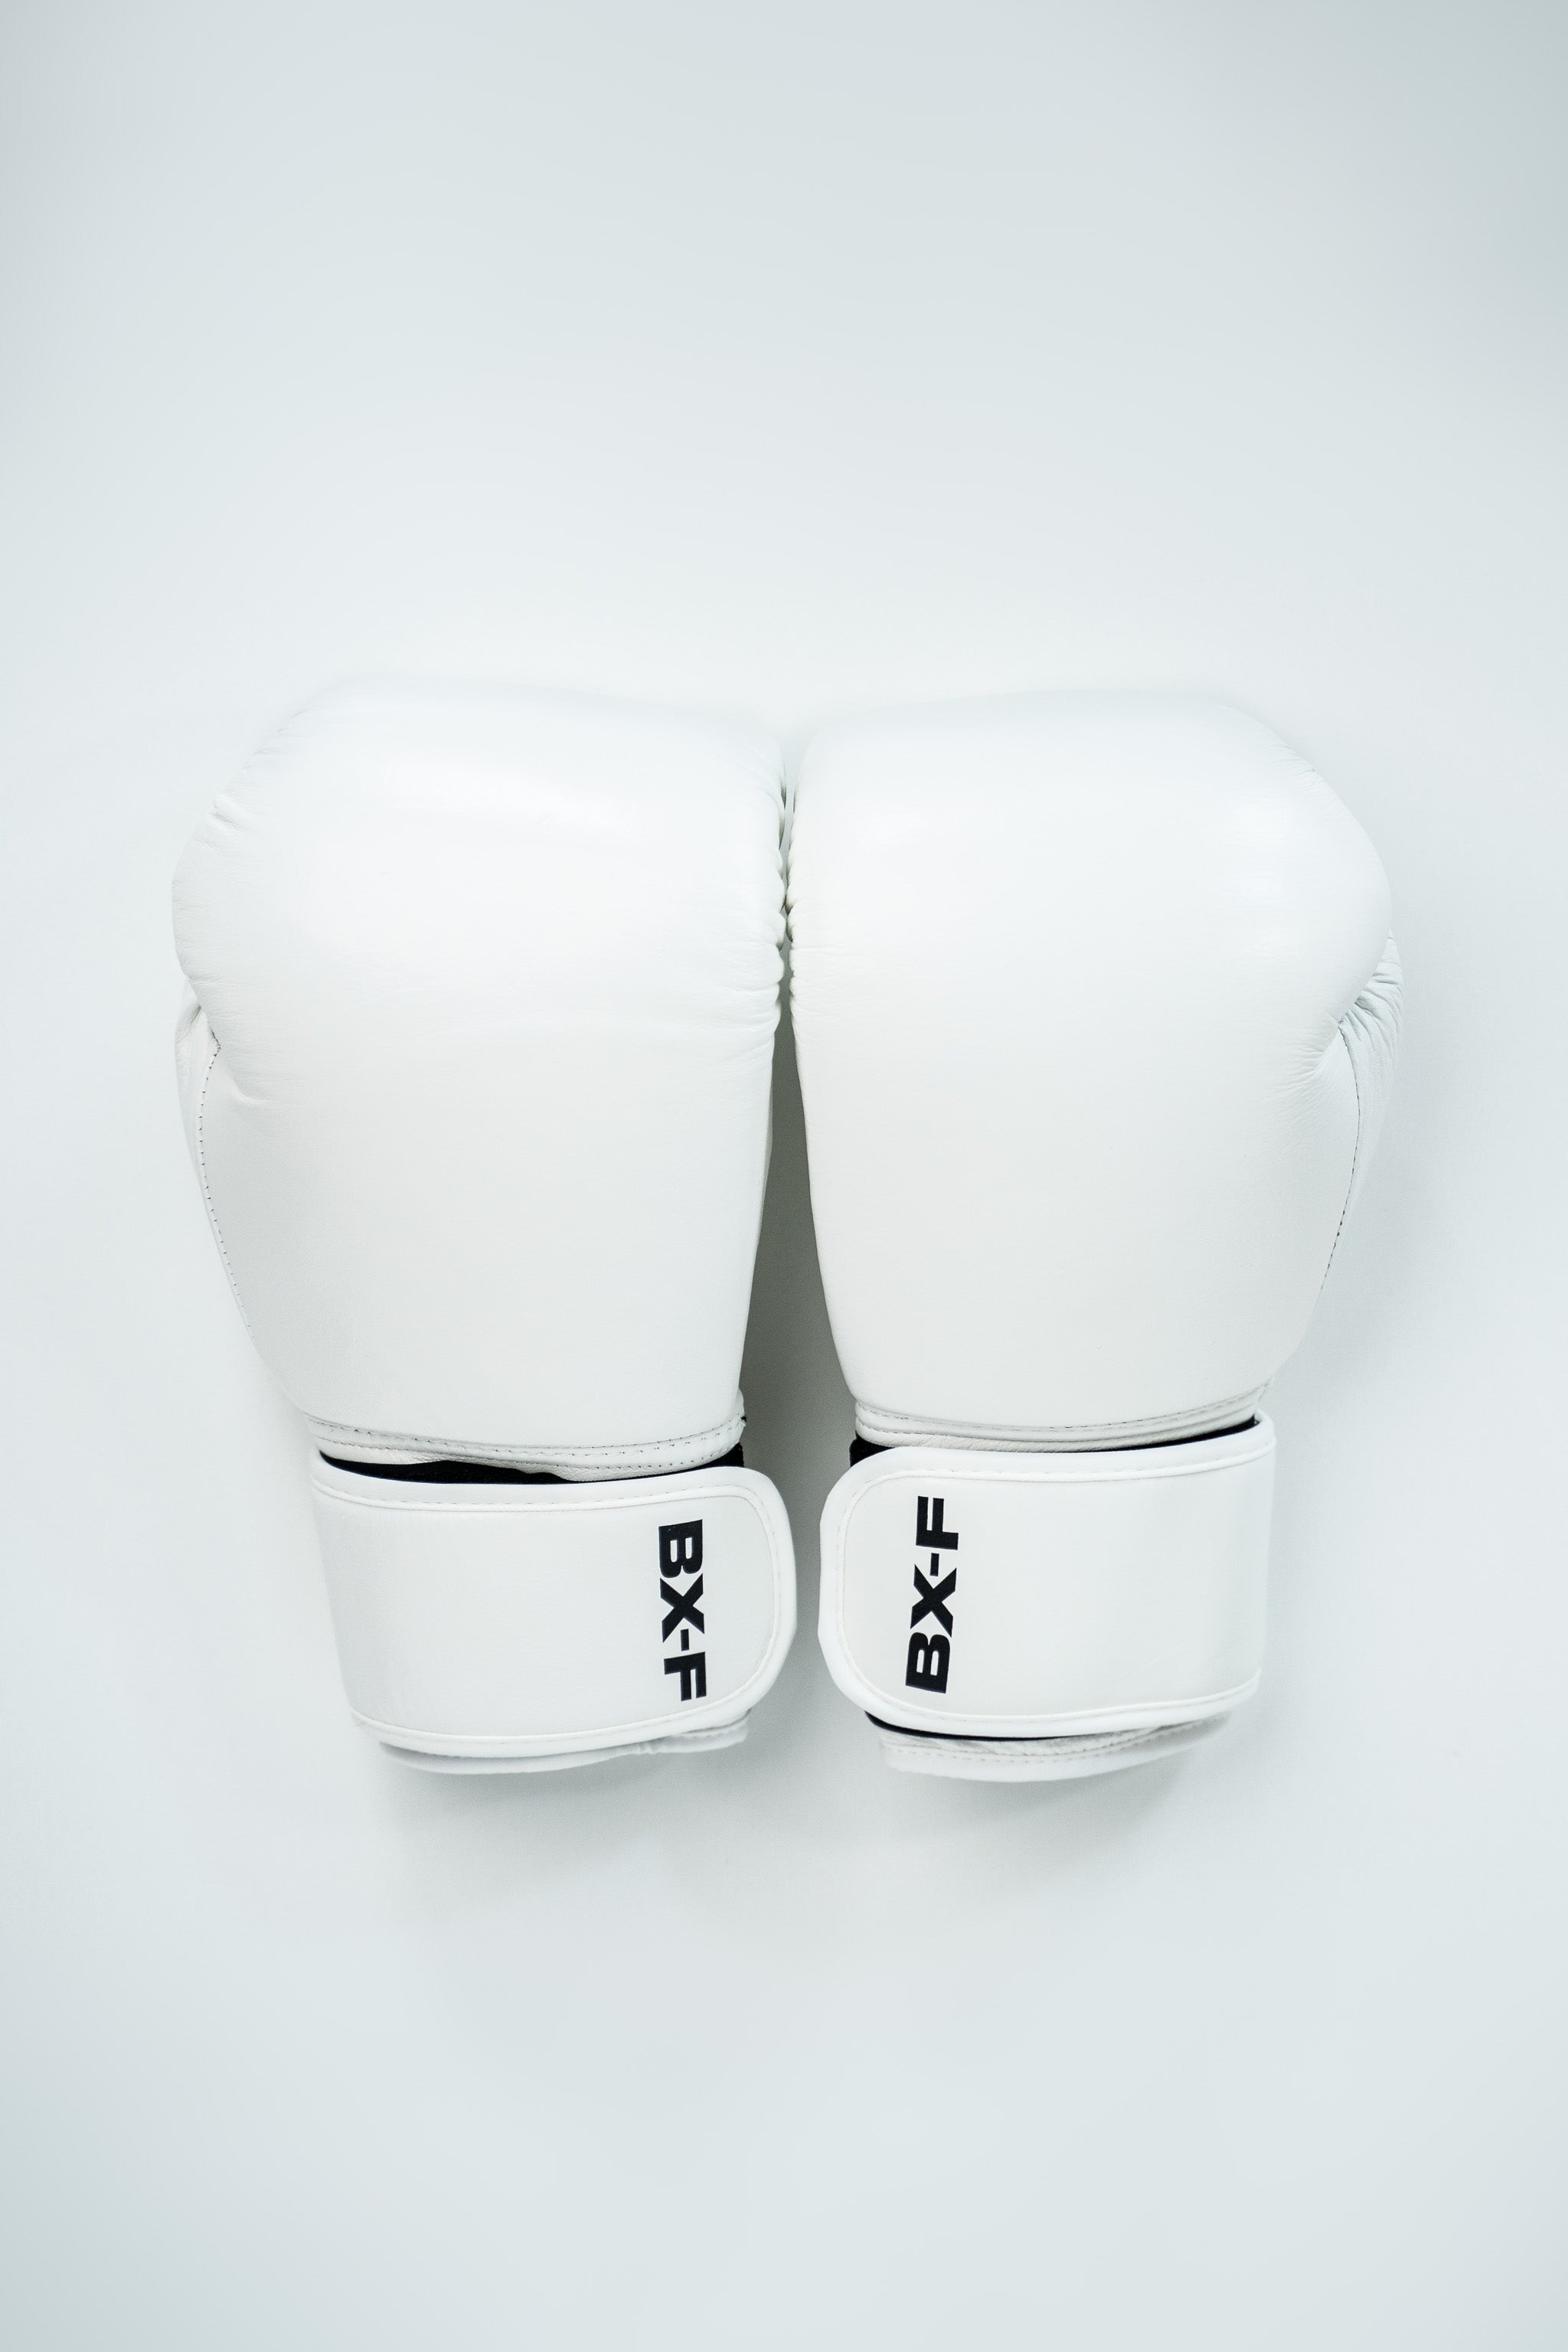 Box Finesse - Training with The Butterfly reflex boxing bag